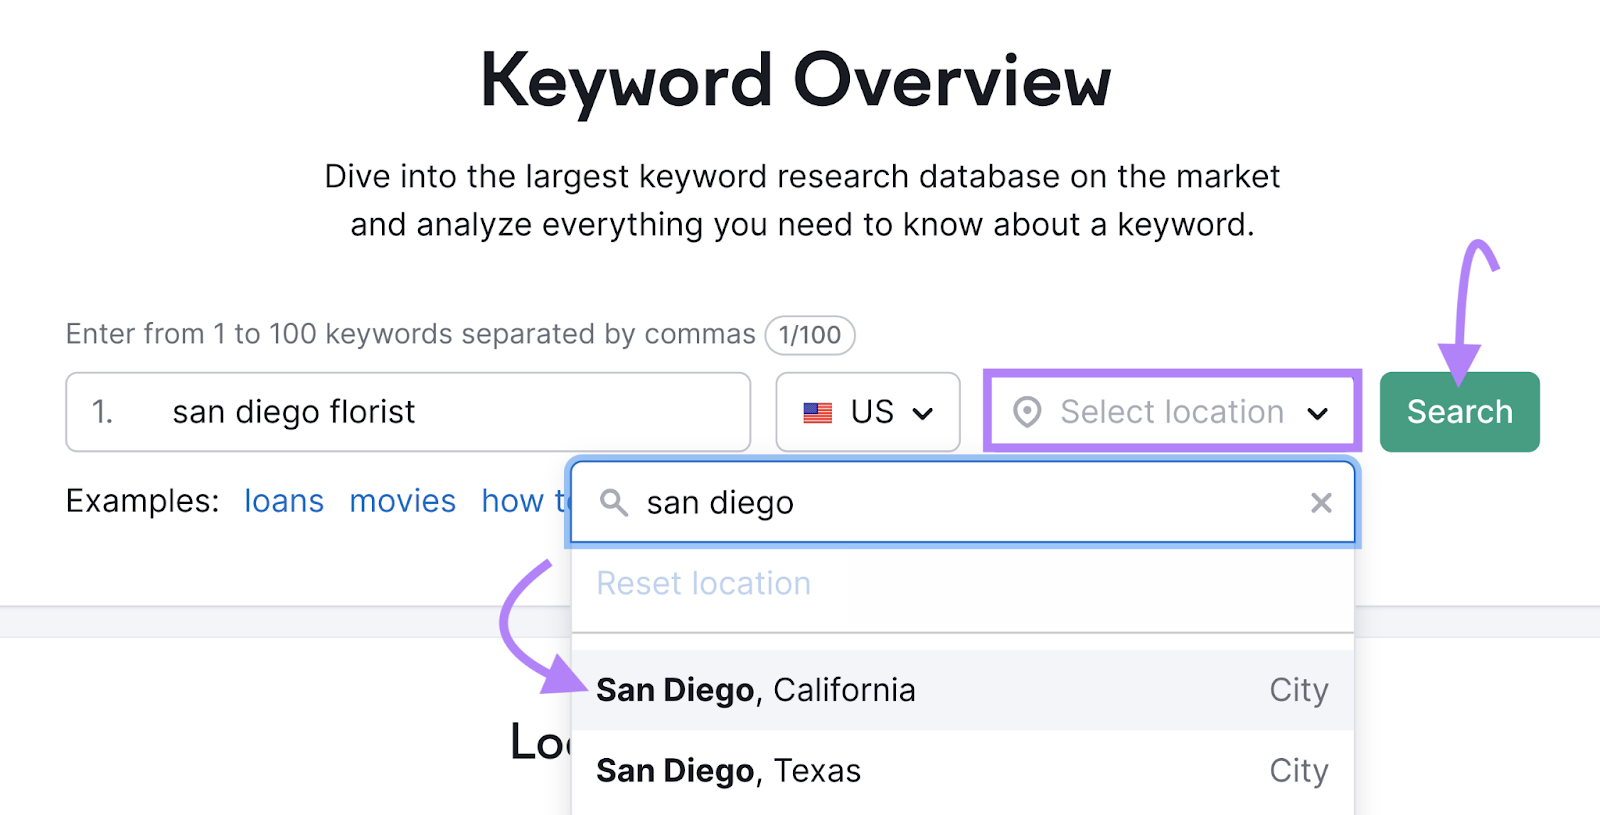 "San Diego, California" location selected in Keyword Overview tool